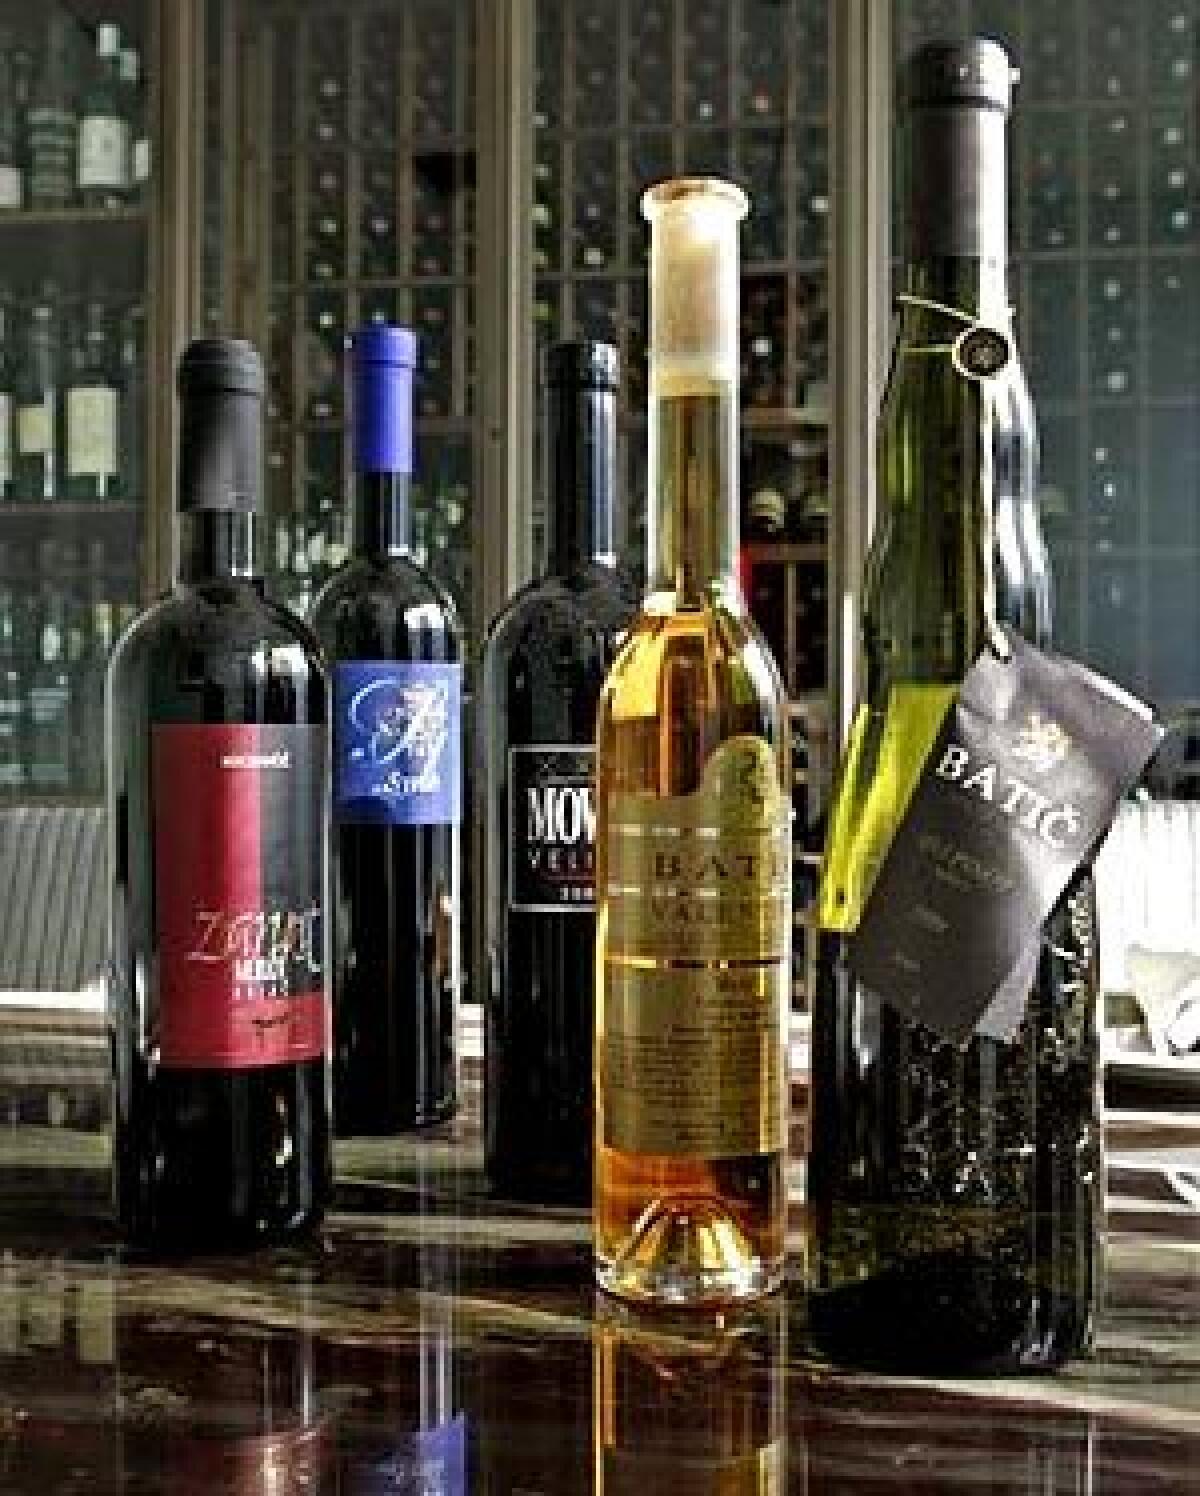 ON THE LIST: Several L.A.-area wine shops and restaurants, such as Bastide in West Hollywood, carry Slovenian wines including Movia, Simcic and Batic.